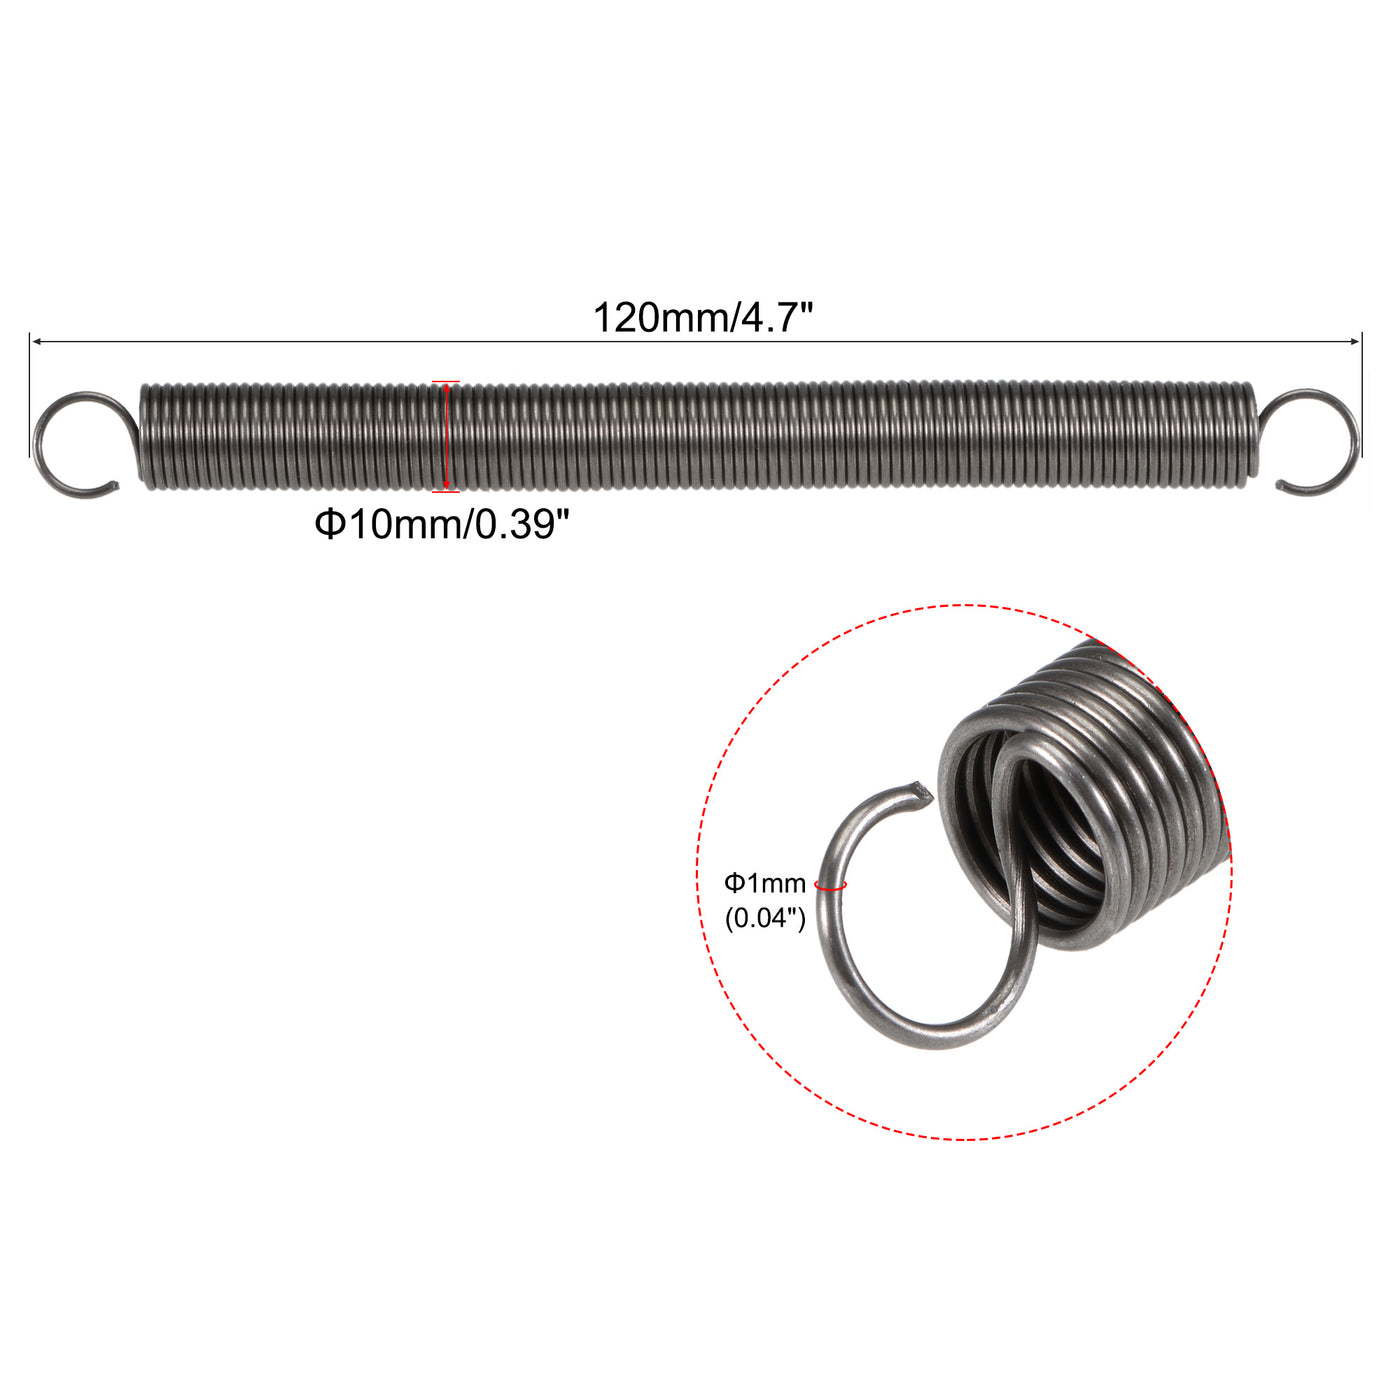 Uxcell Uxcell 1mmx10mmx80mm Extended Extension Spring ,3.3Lbs Load Capacity,Grey 2pcs